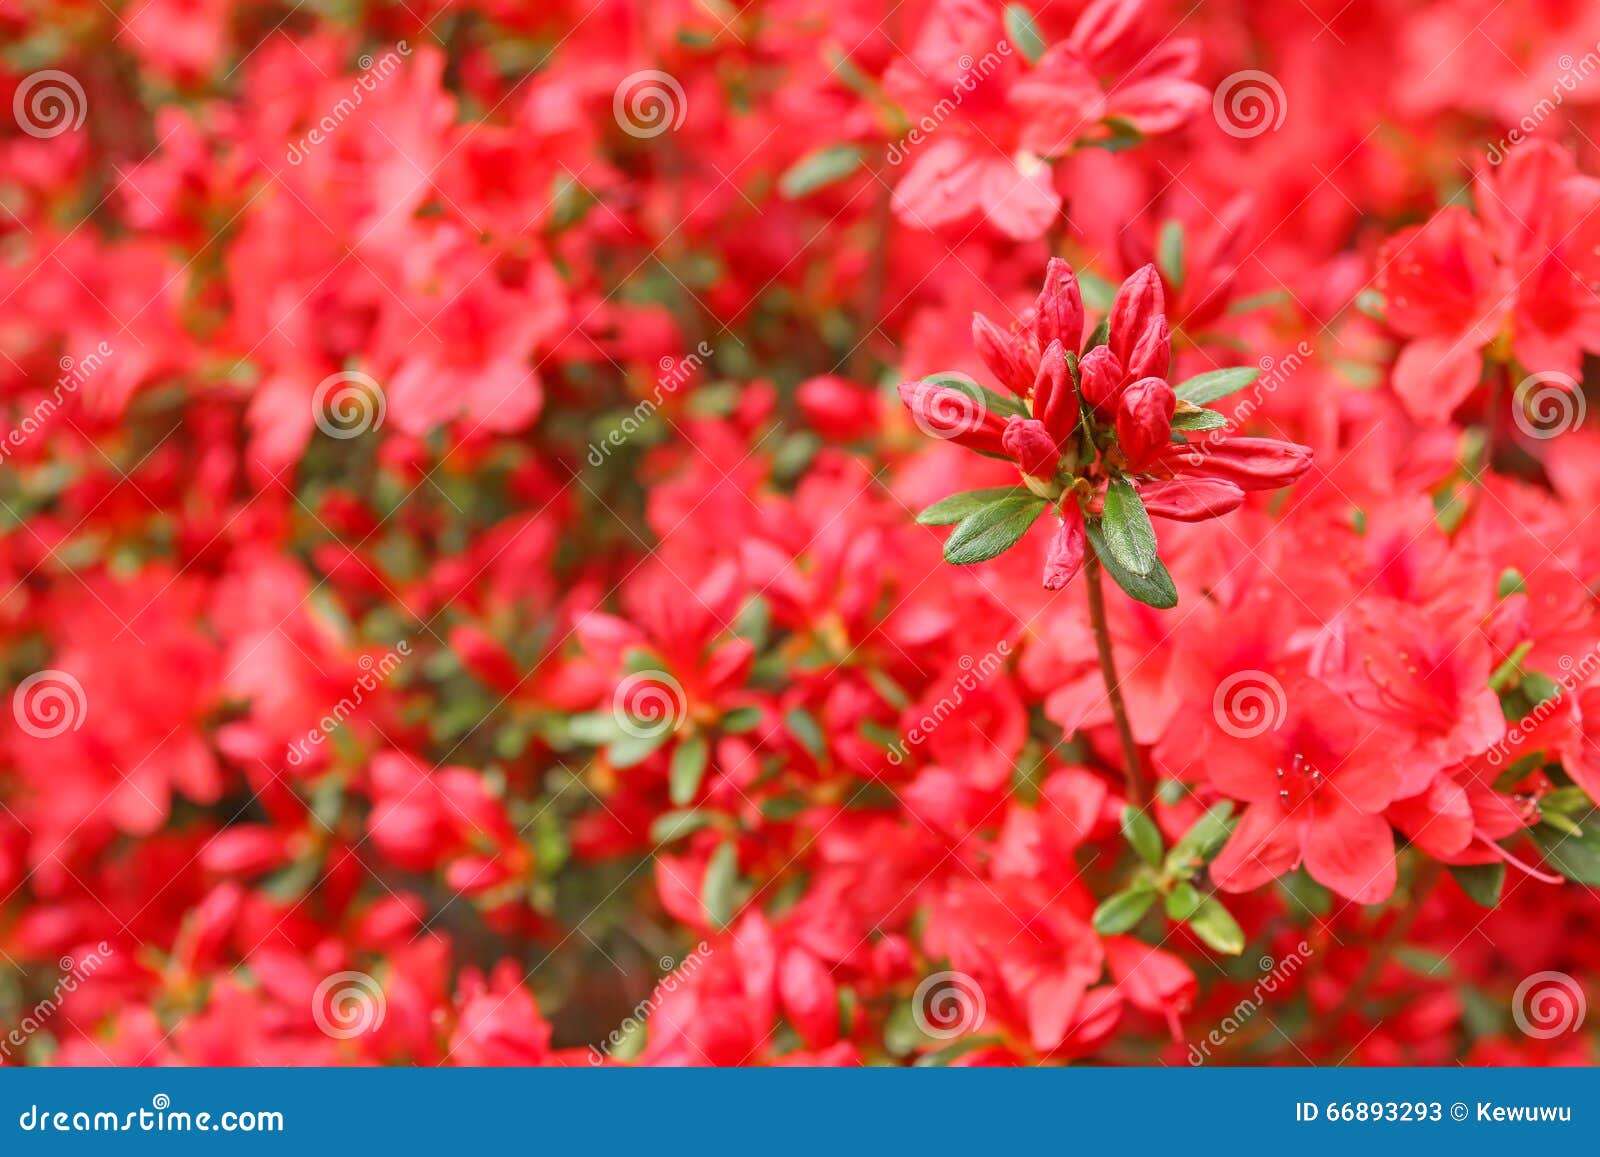 azalea japonica red flowers ready to bloom in spring